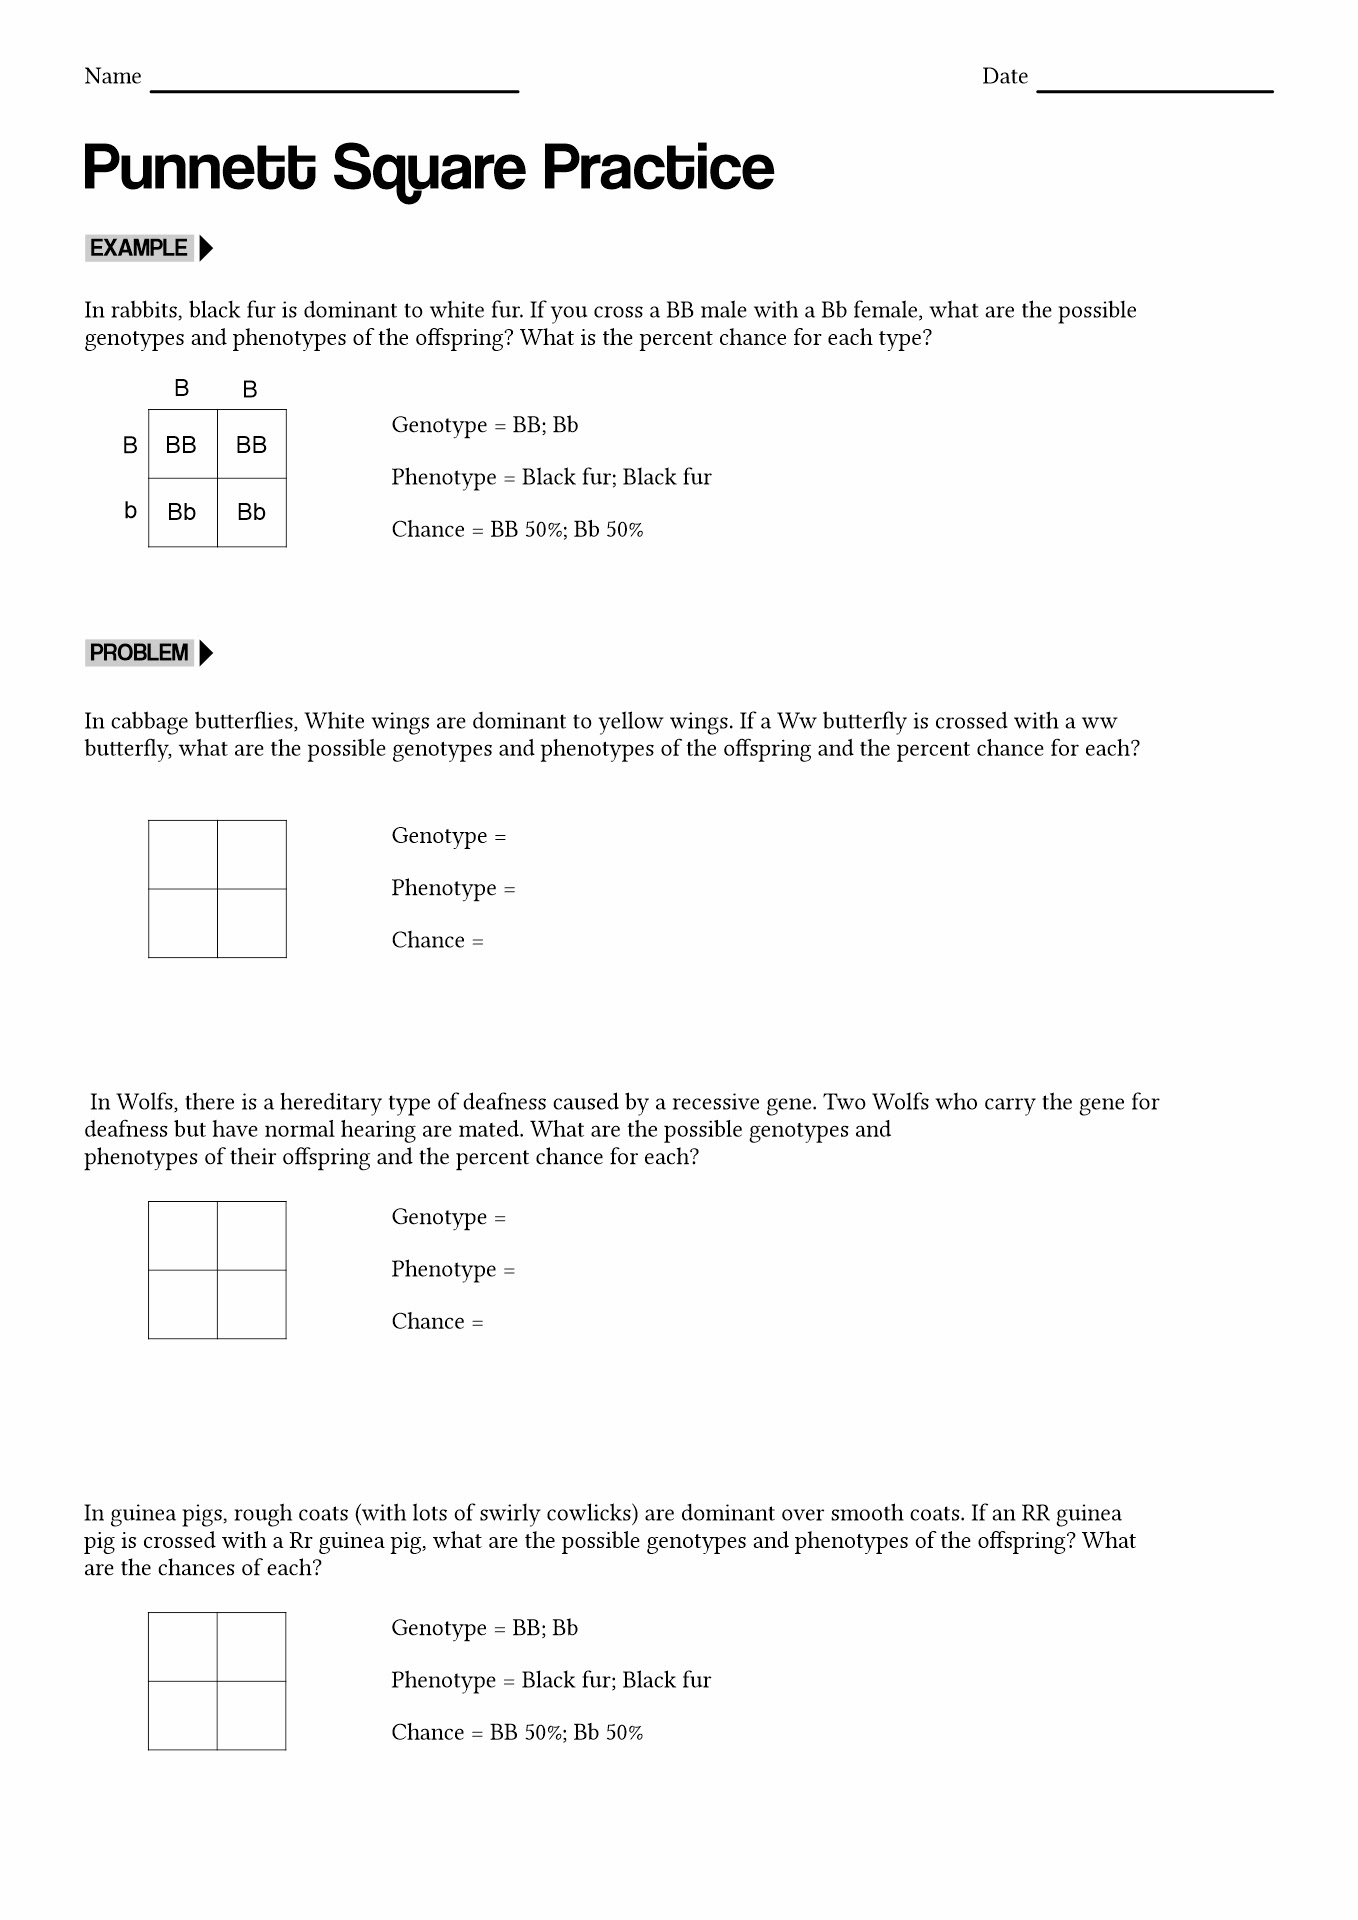 15 Best Images of Square Worksheet Answer Key Square